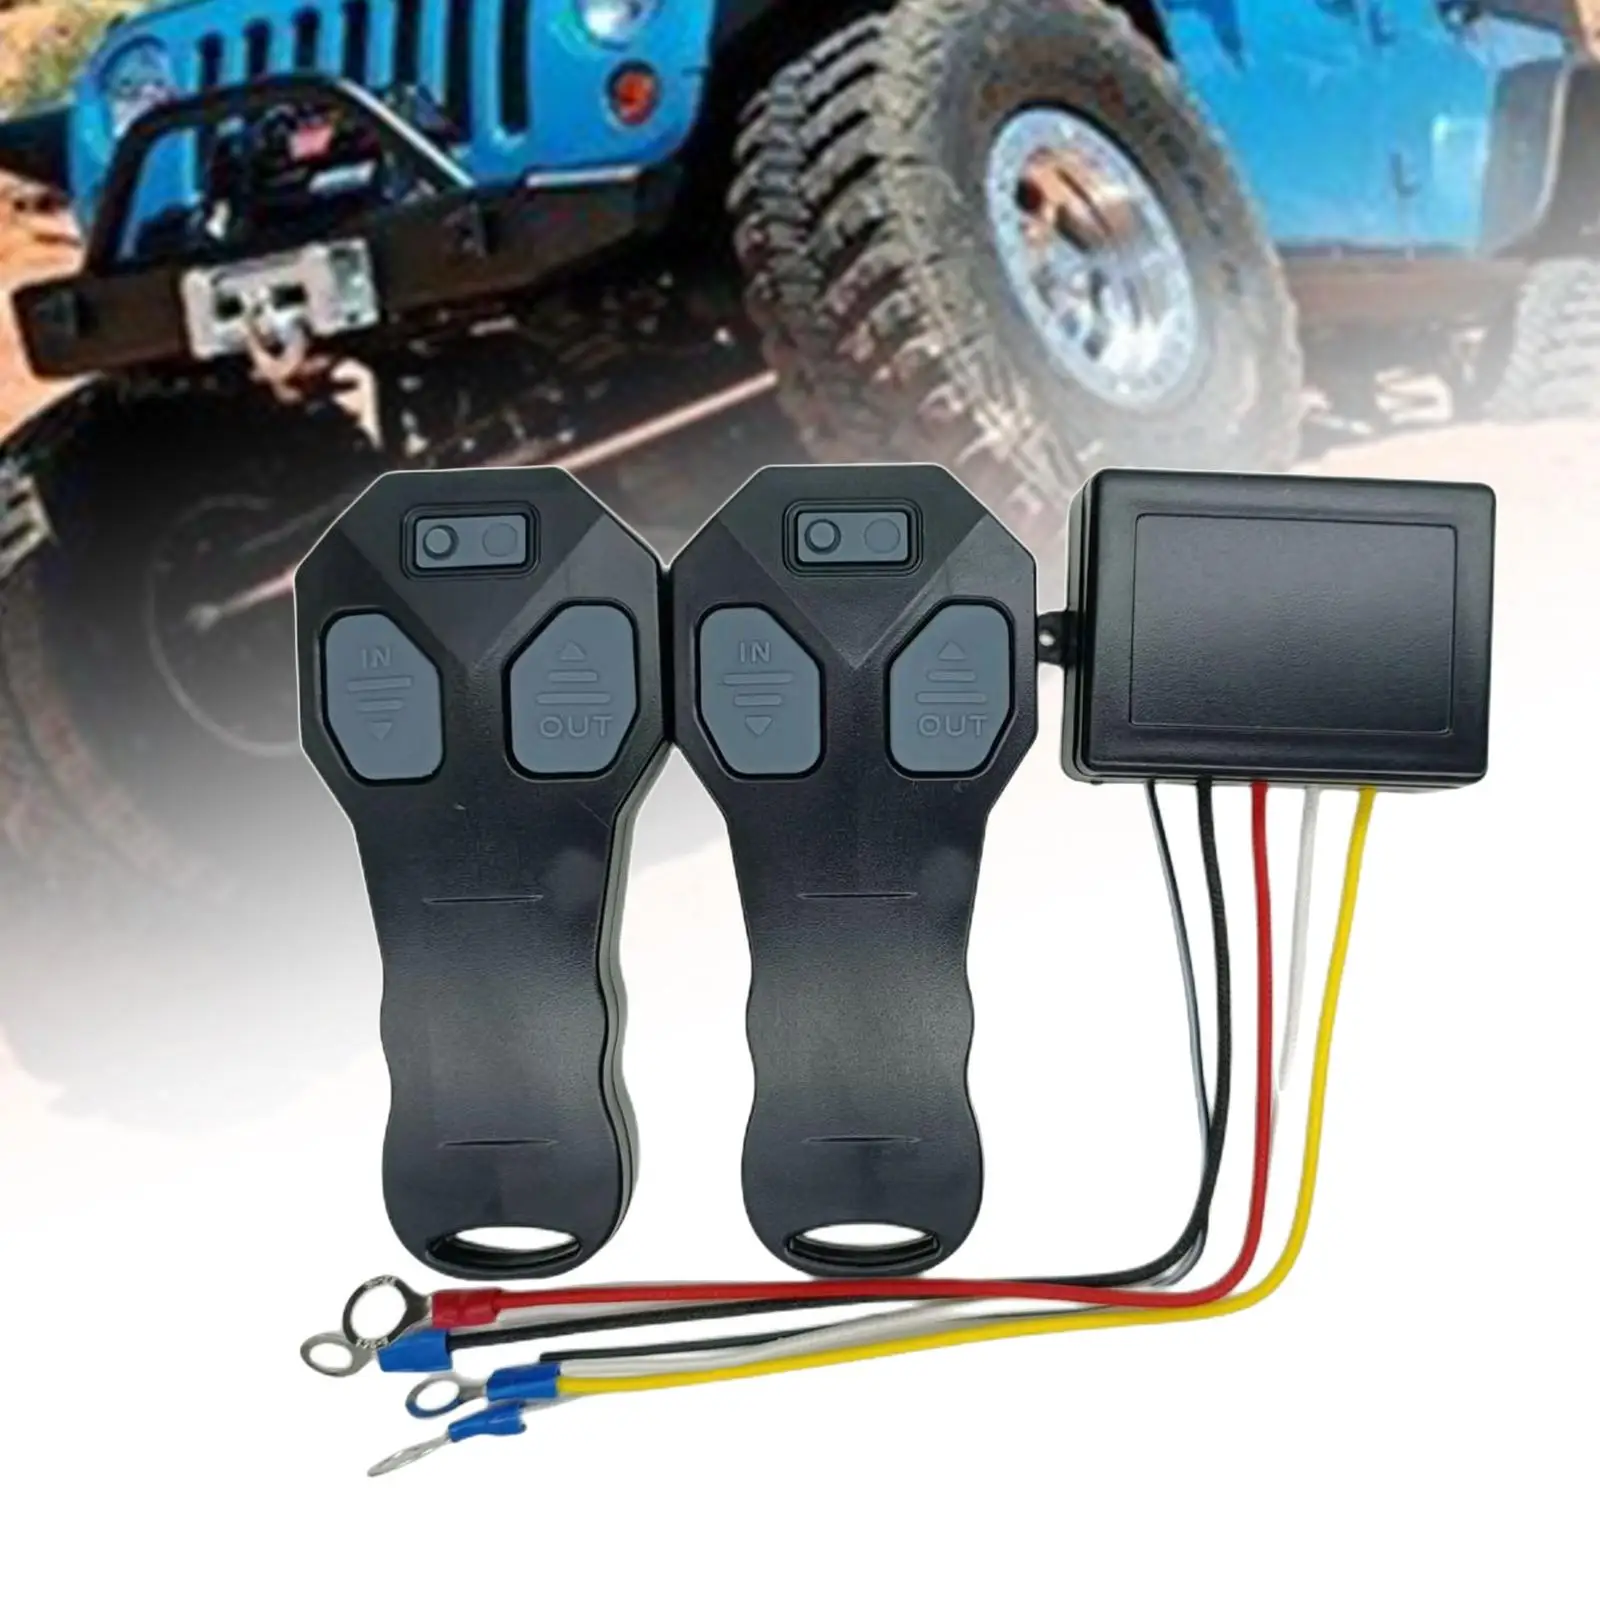 Wireless Winch Remote Control Kit Waterproof High Performance 2 Electric Remote Control for Truck ATV Trailer SUV Car